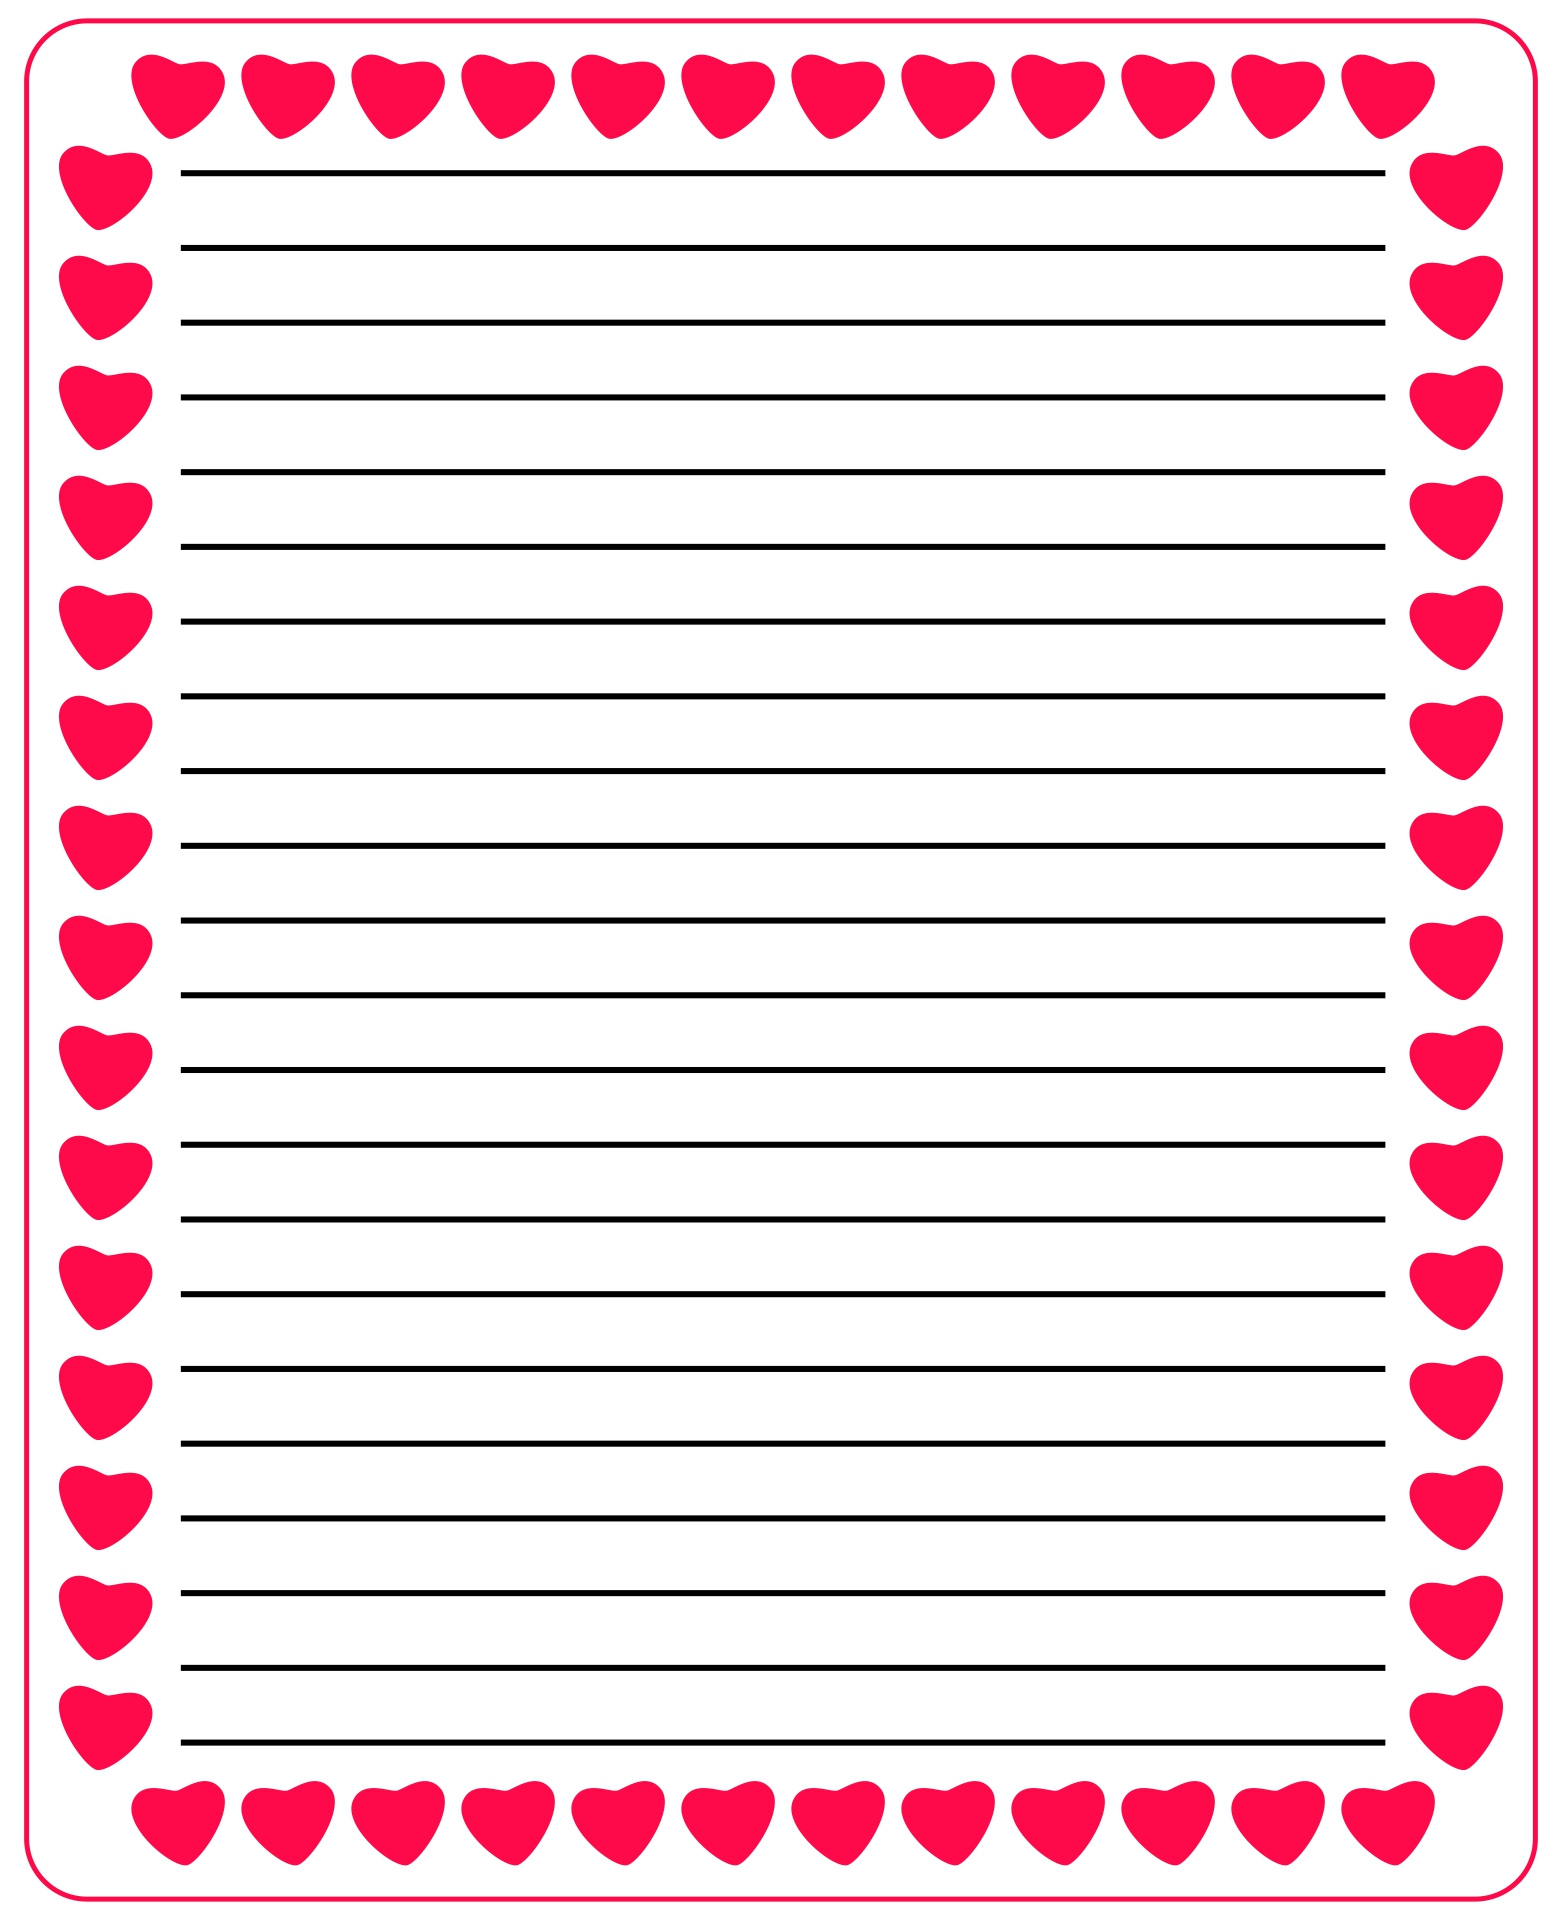 Free Printable Lined Paper For Letter Writing